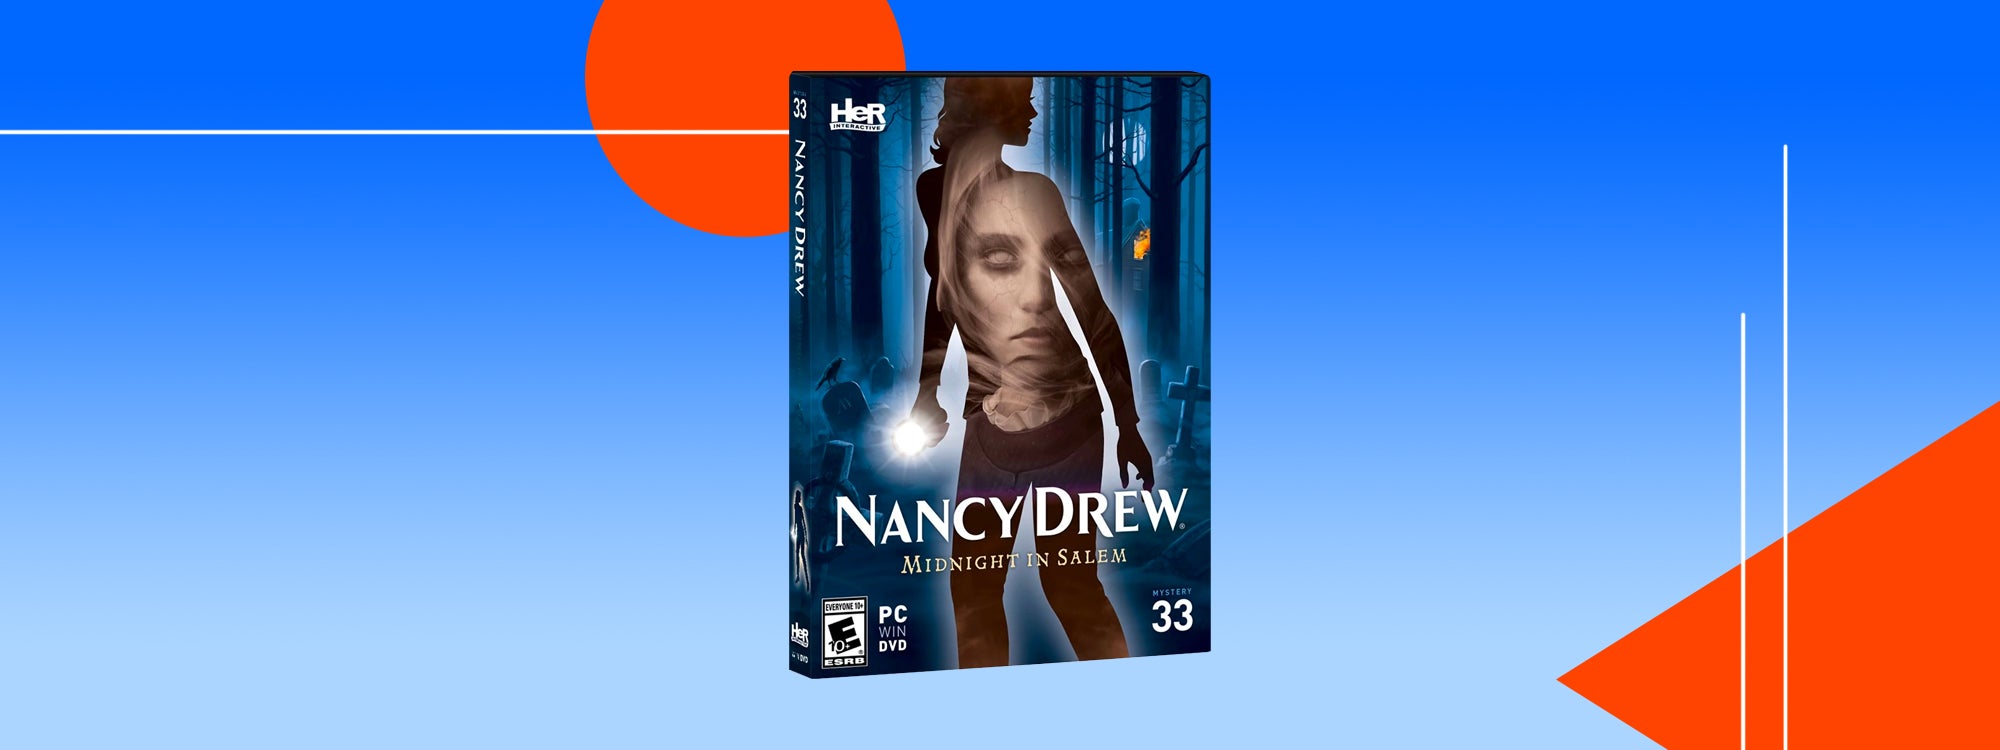 when does the new nancy drew game come out